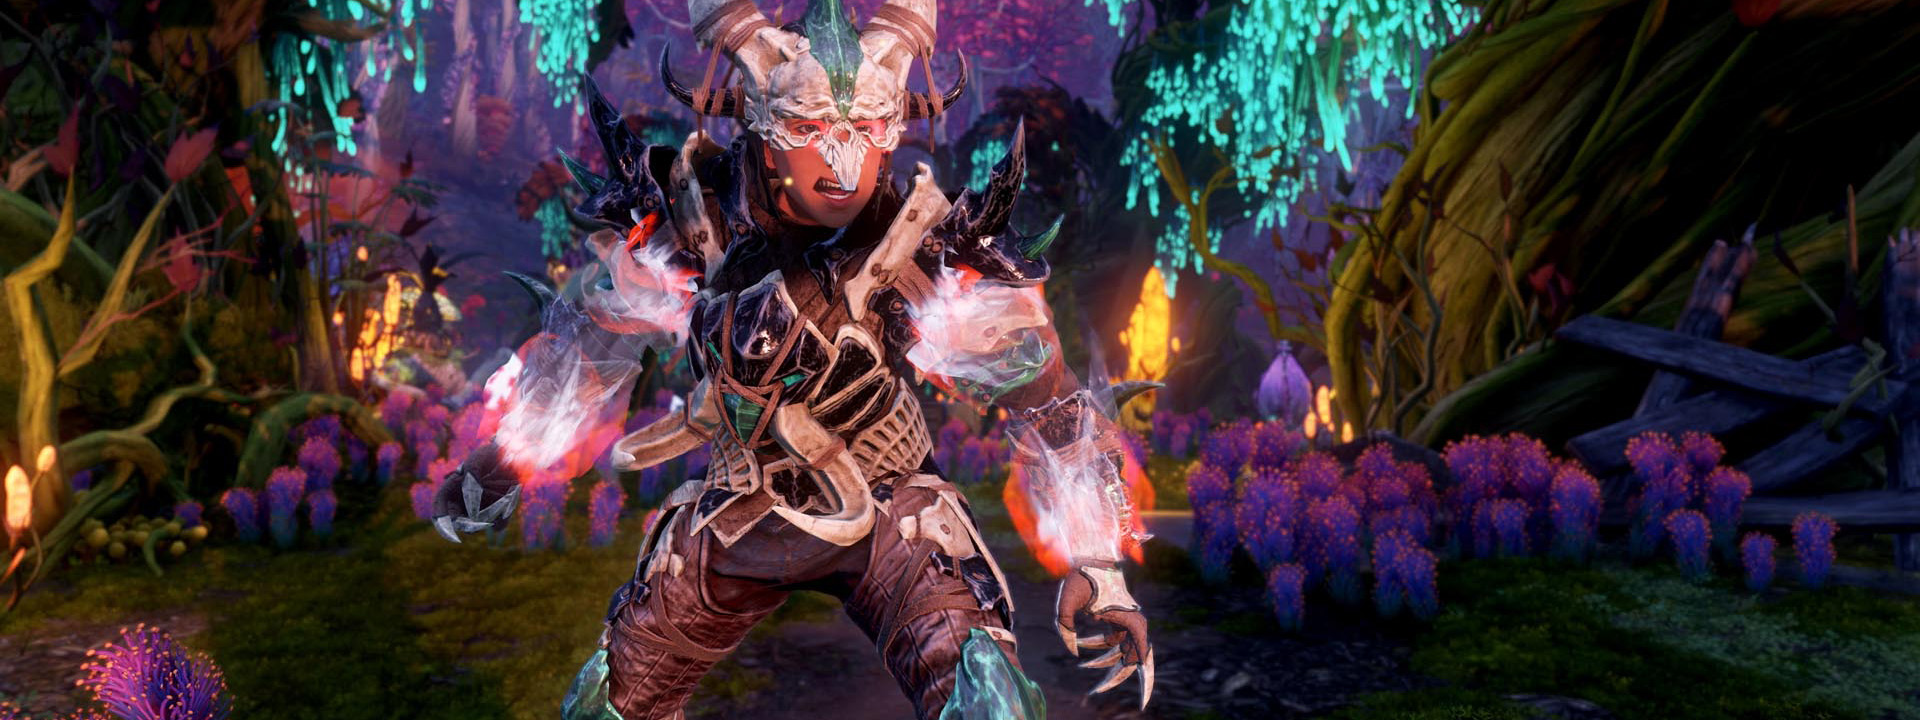 An Adventurers uses the Primal Fury Heartrune to transform in Elysian Wilds.